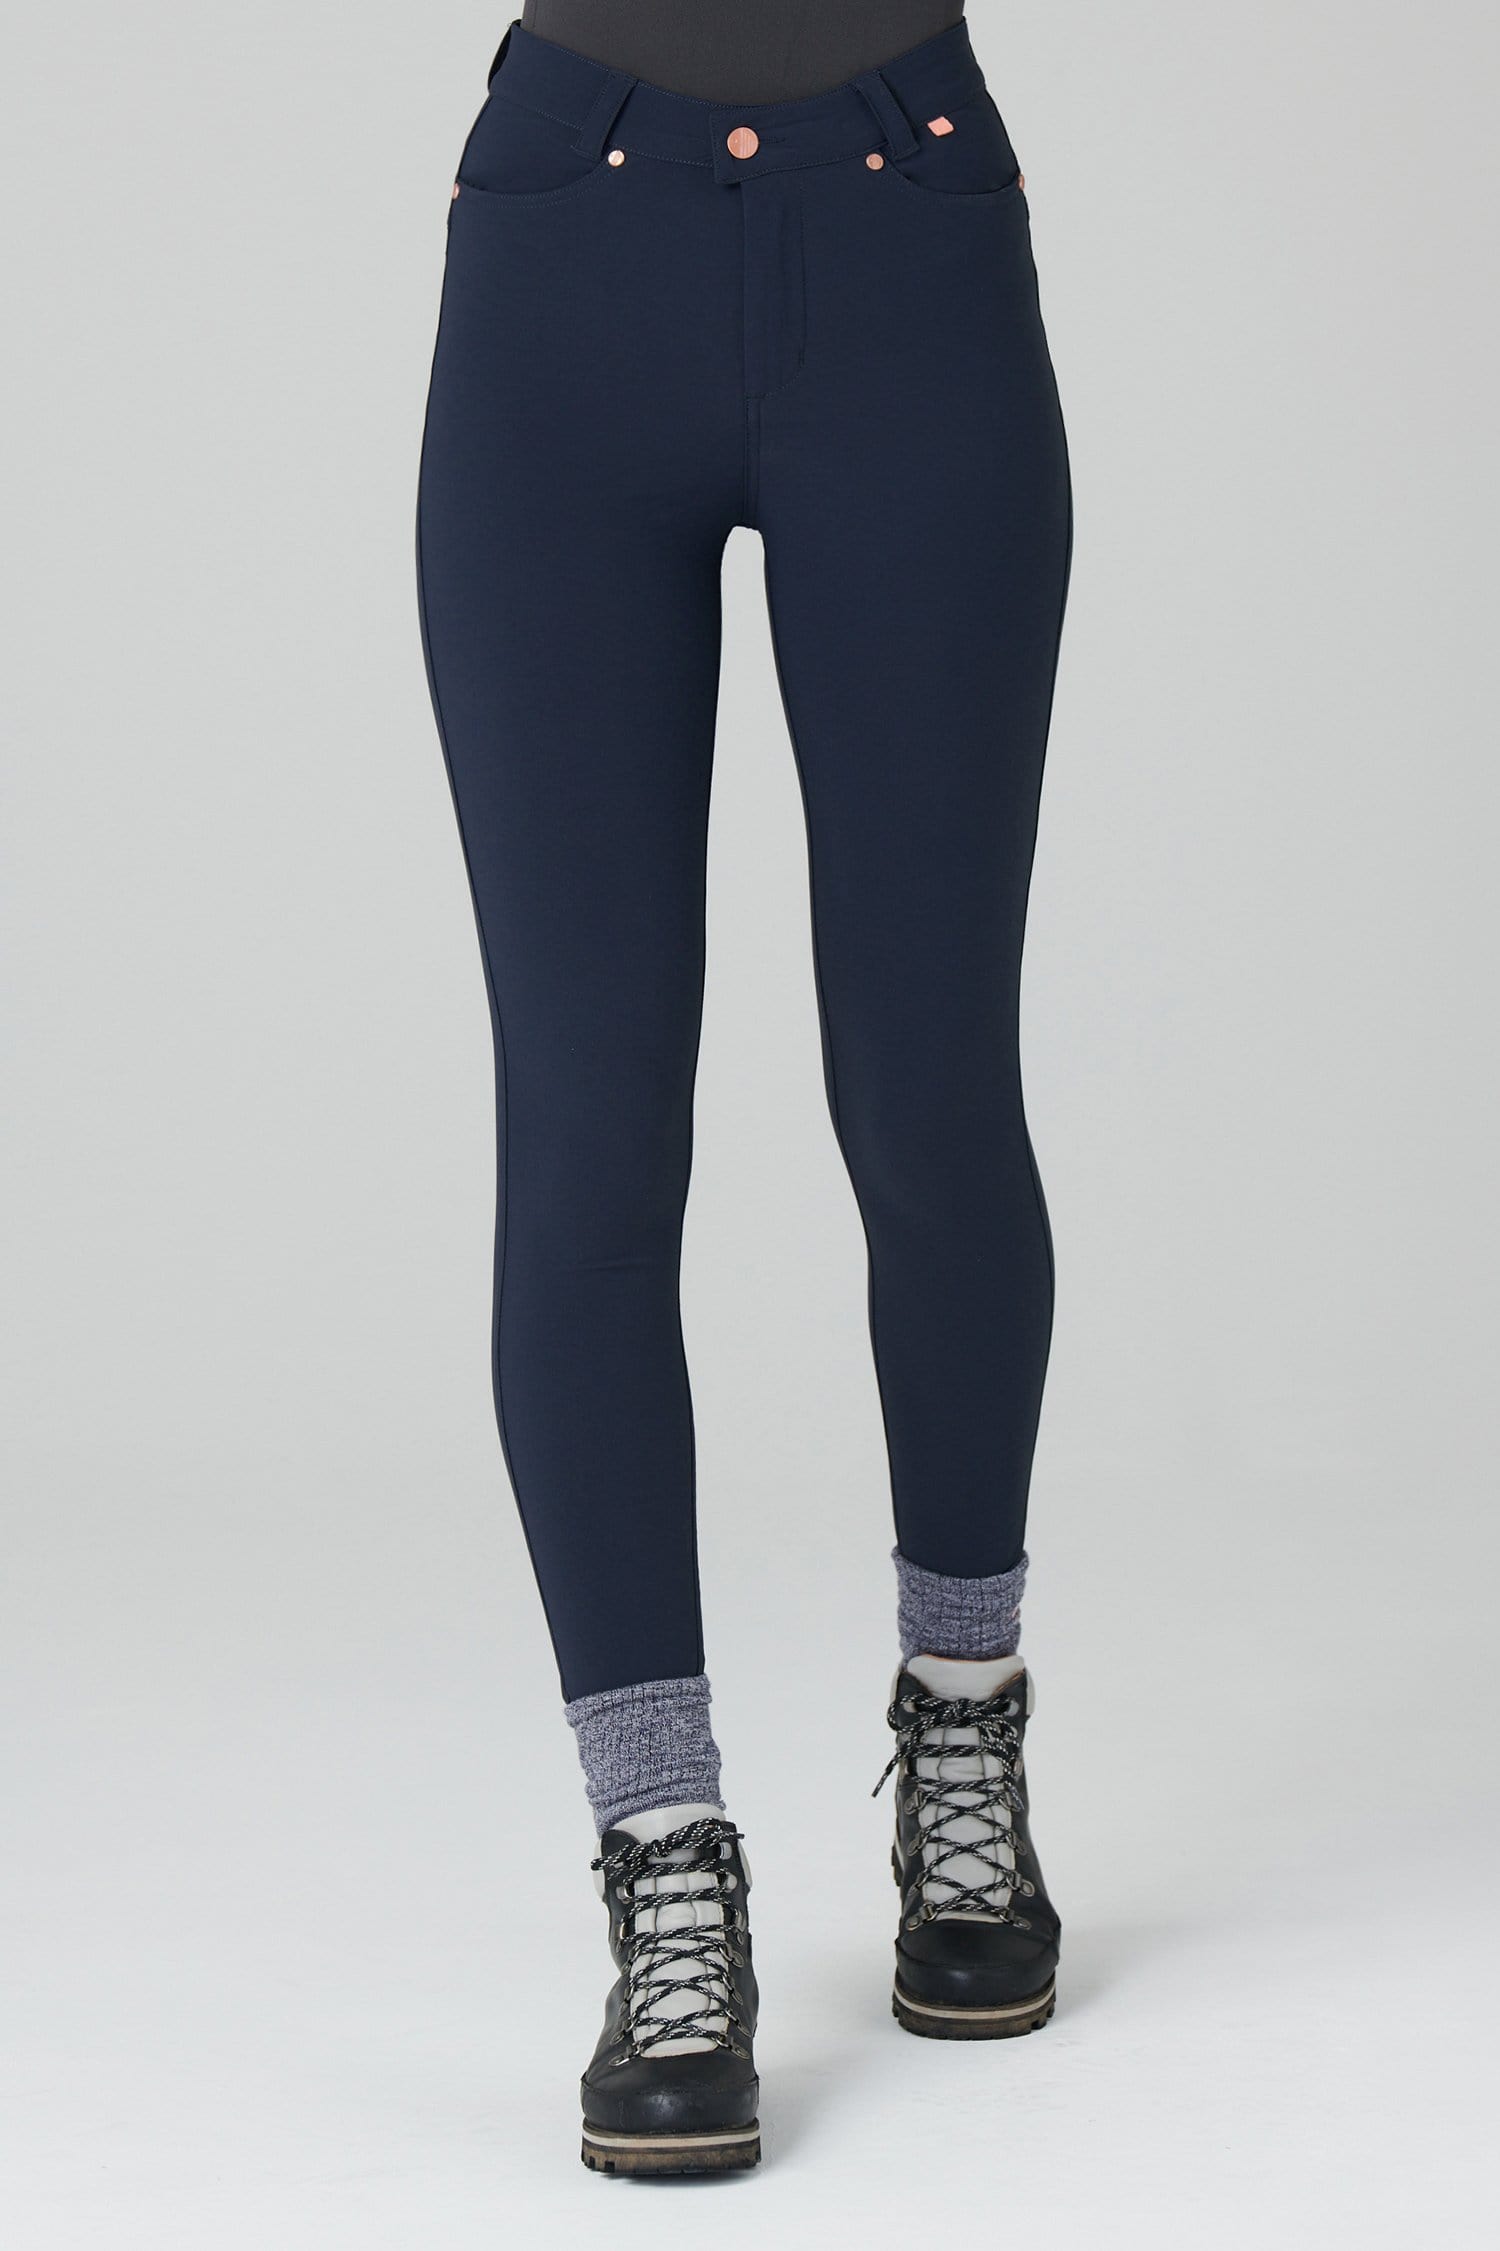 Thermal Skinny Outdoor Trousers - Deep Navy - 30xl / Uk12 - Womens - Acai Outdoorwear